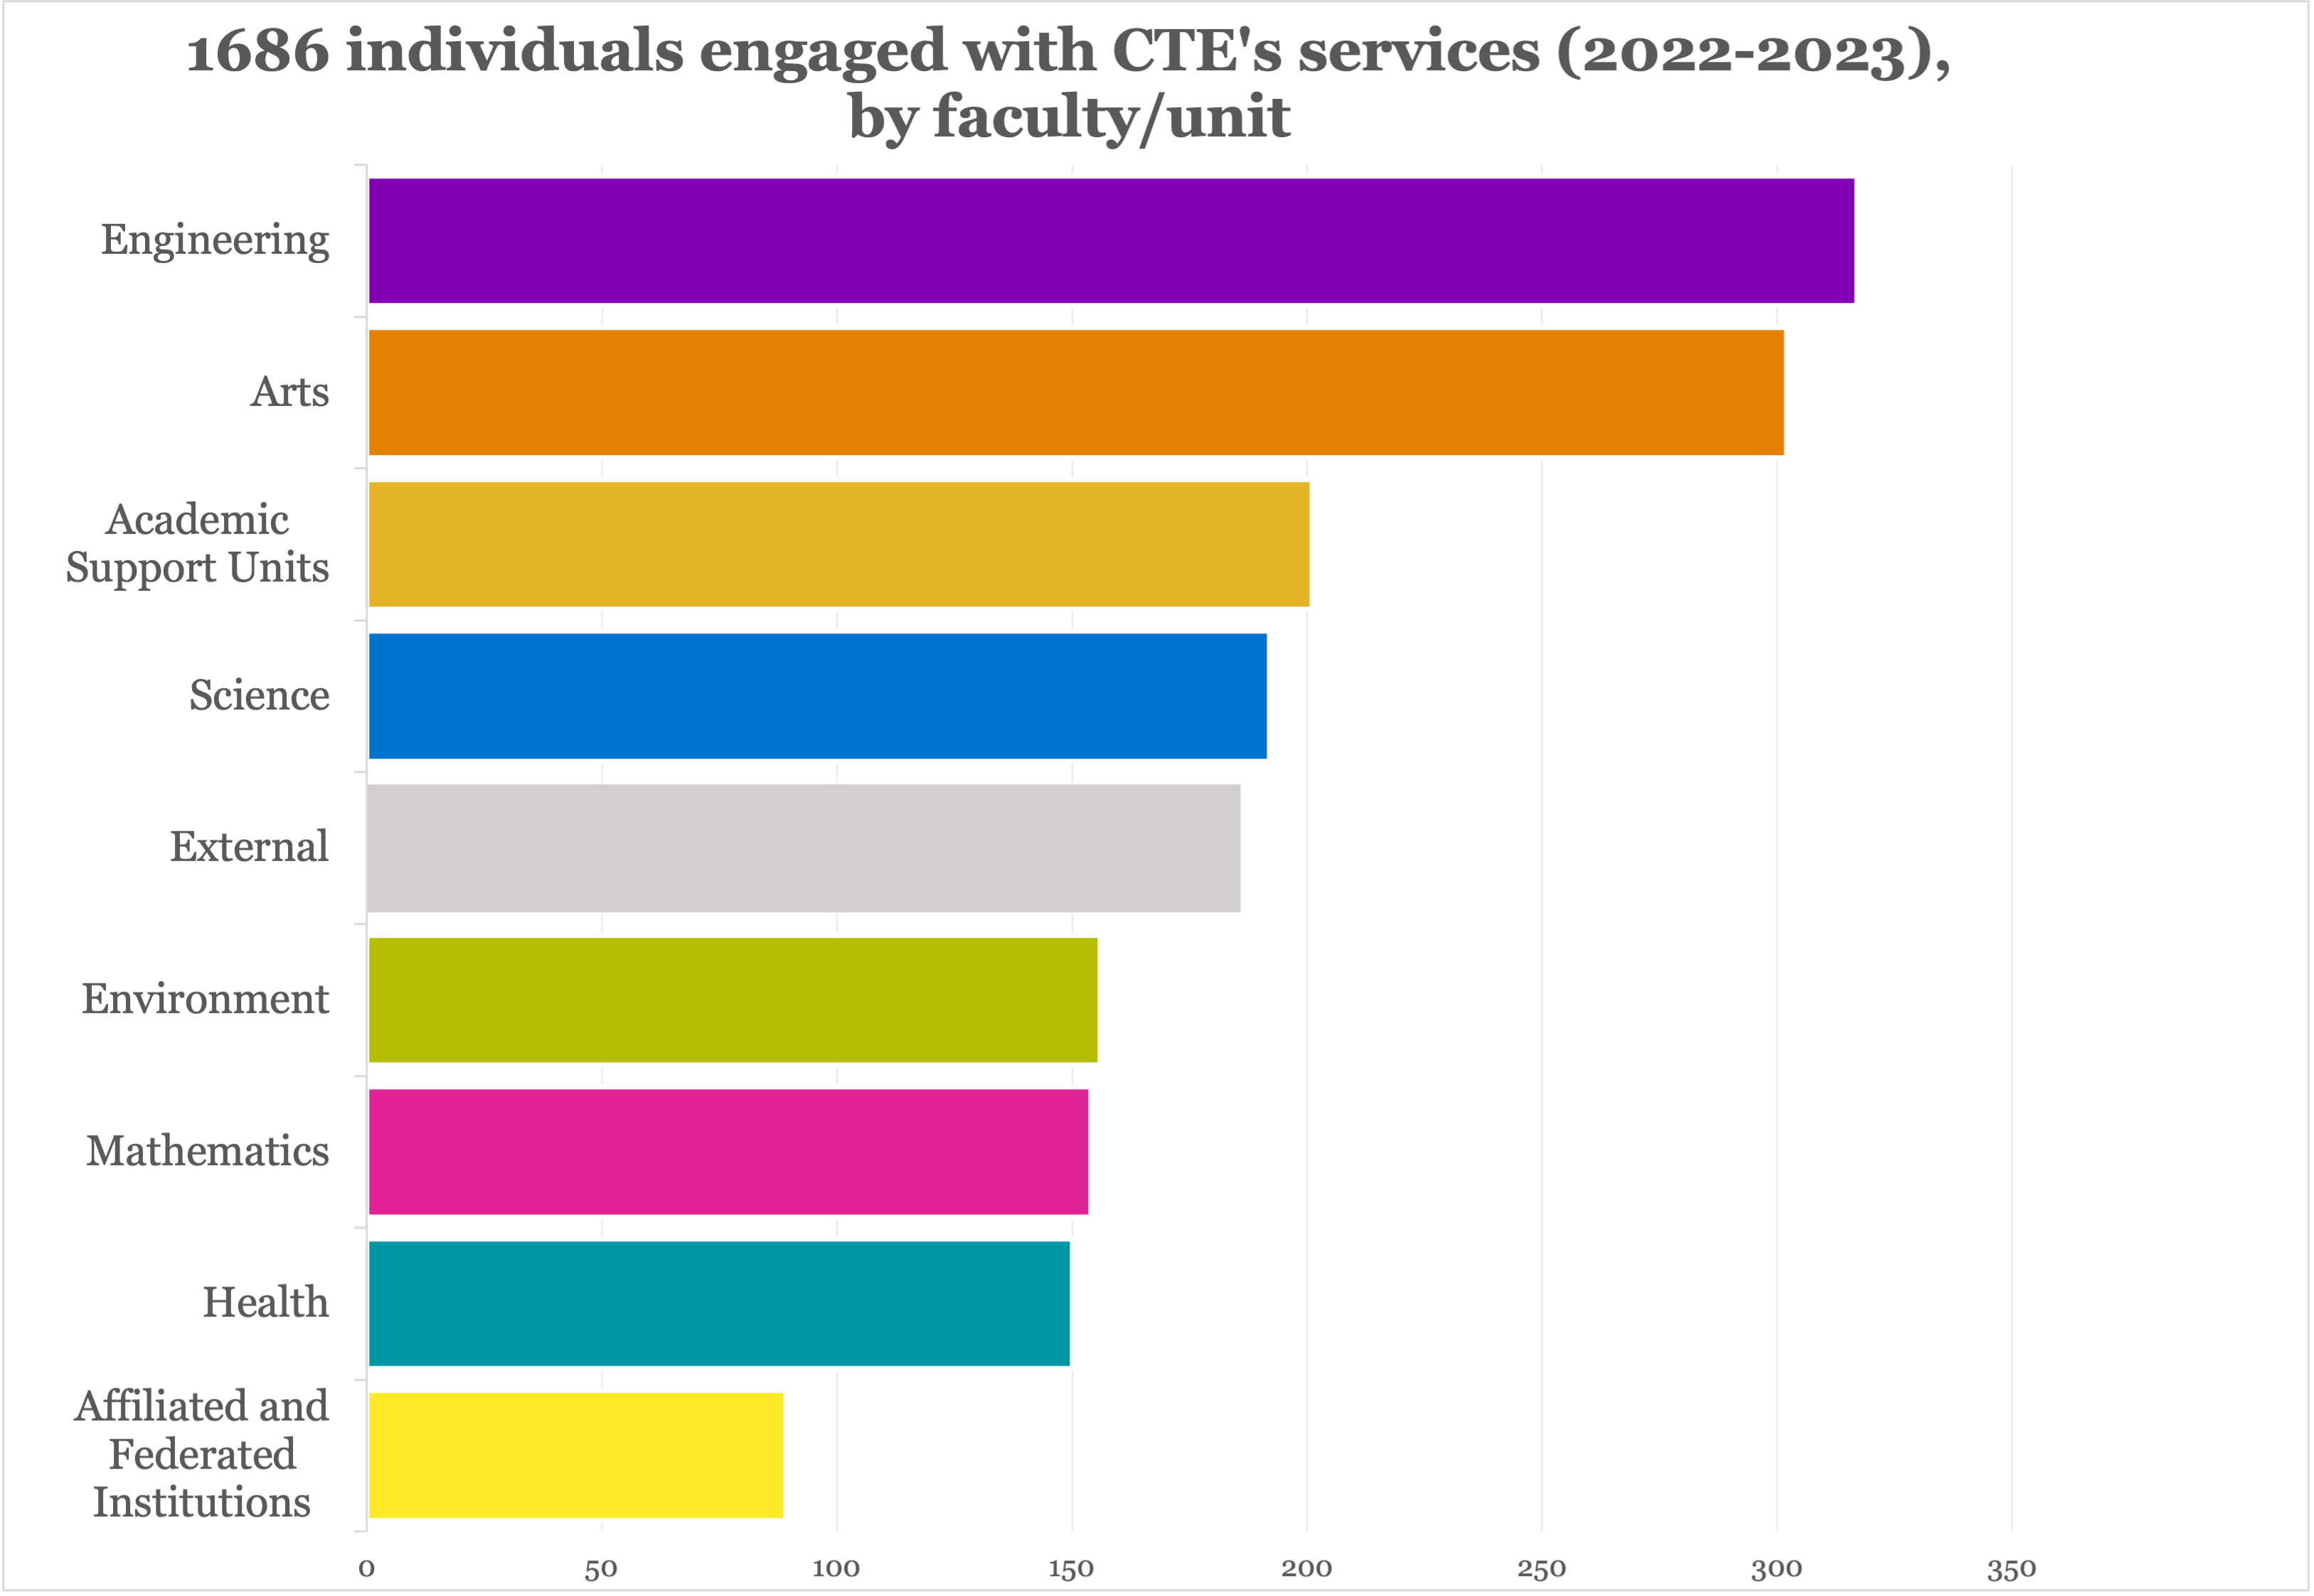 1686 individuals engaged with CTE's services 2022-2023. The image displays a graph of a faculty breakdown.